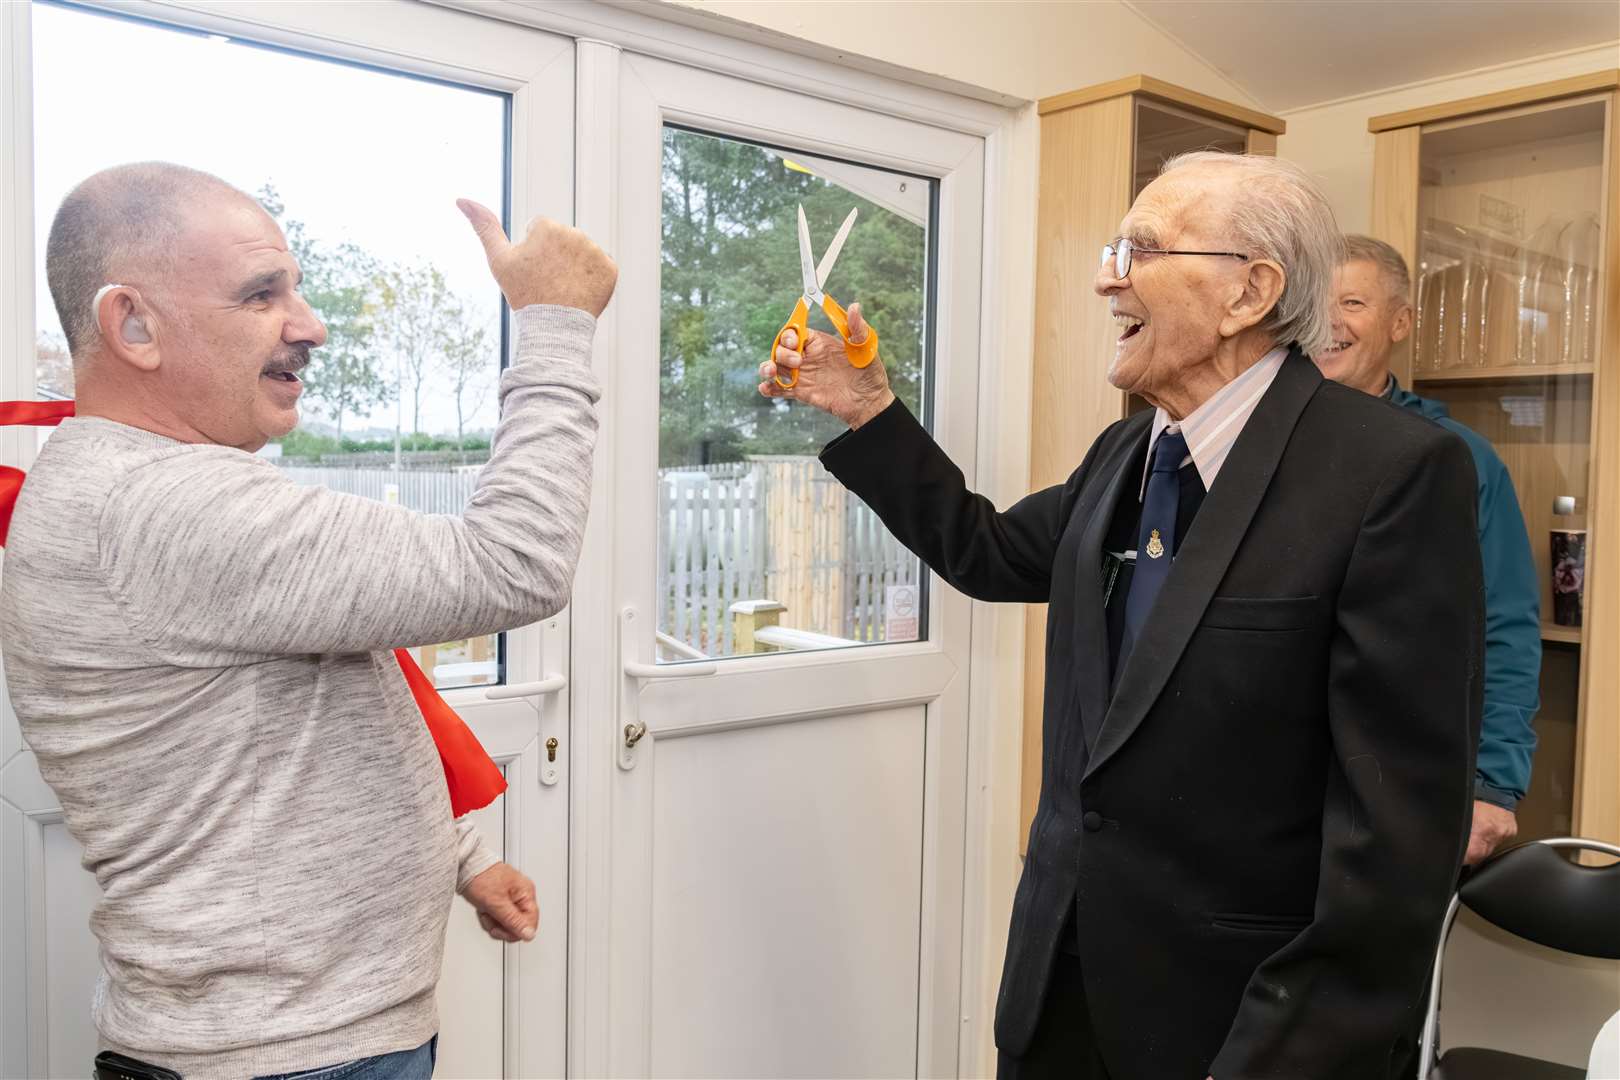 Bill Gray (left) gives the thumbs up as Walter Childs cuts the ribbon to officially open the new community hub.